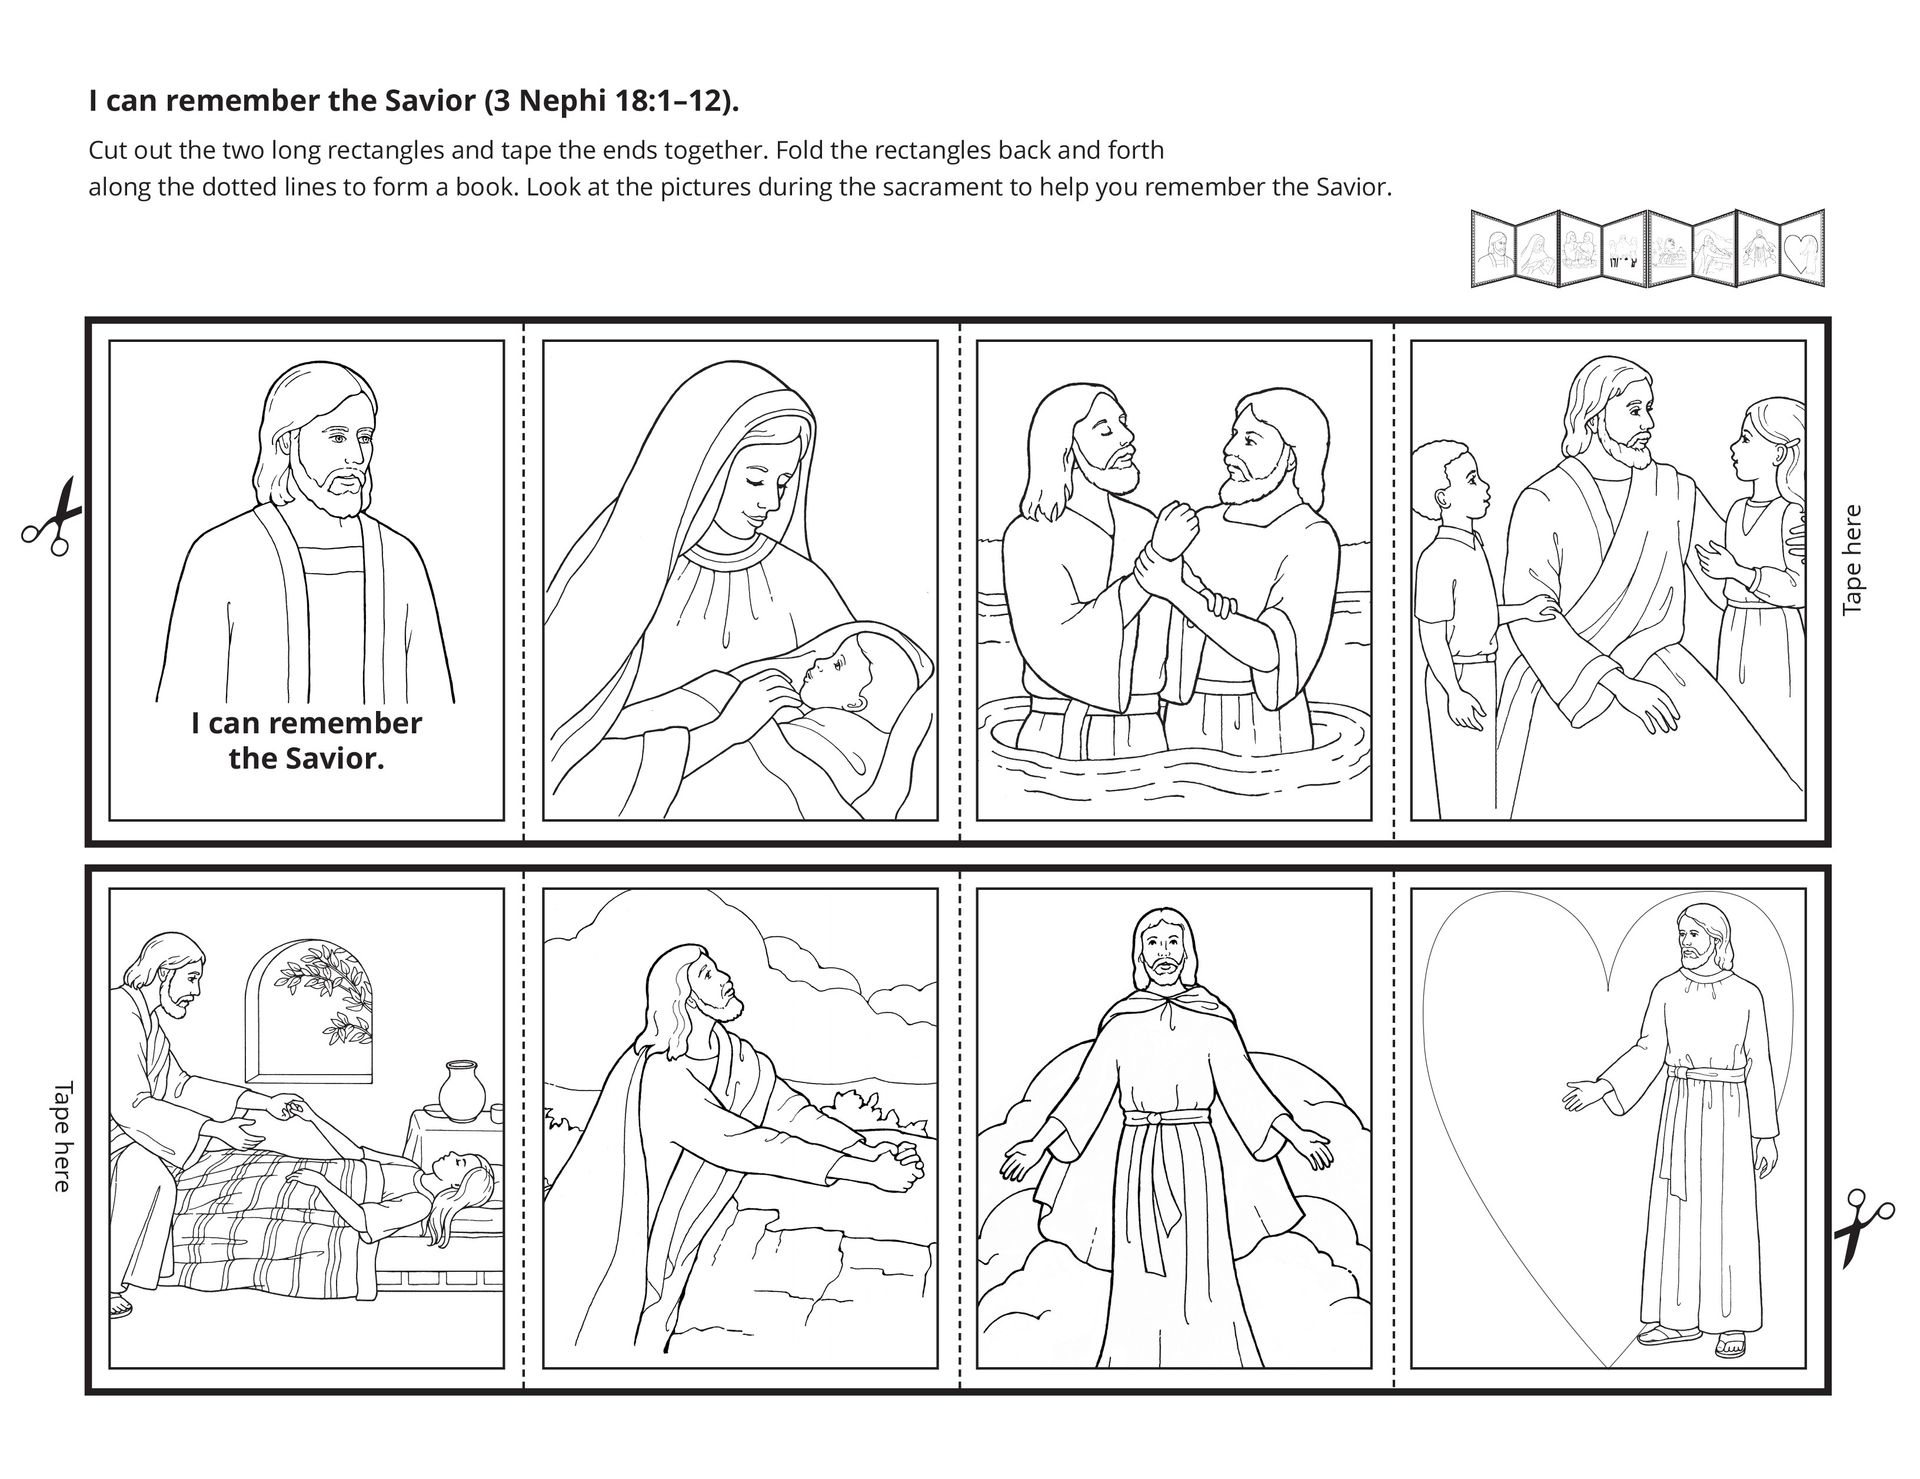 A line-art activity showing ways to remember the Savior.